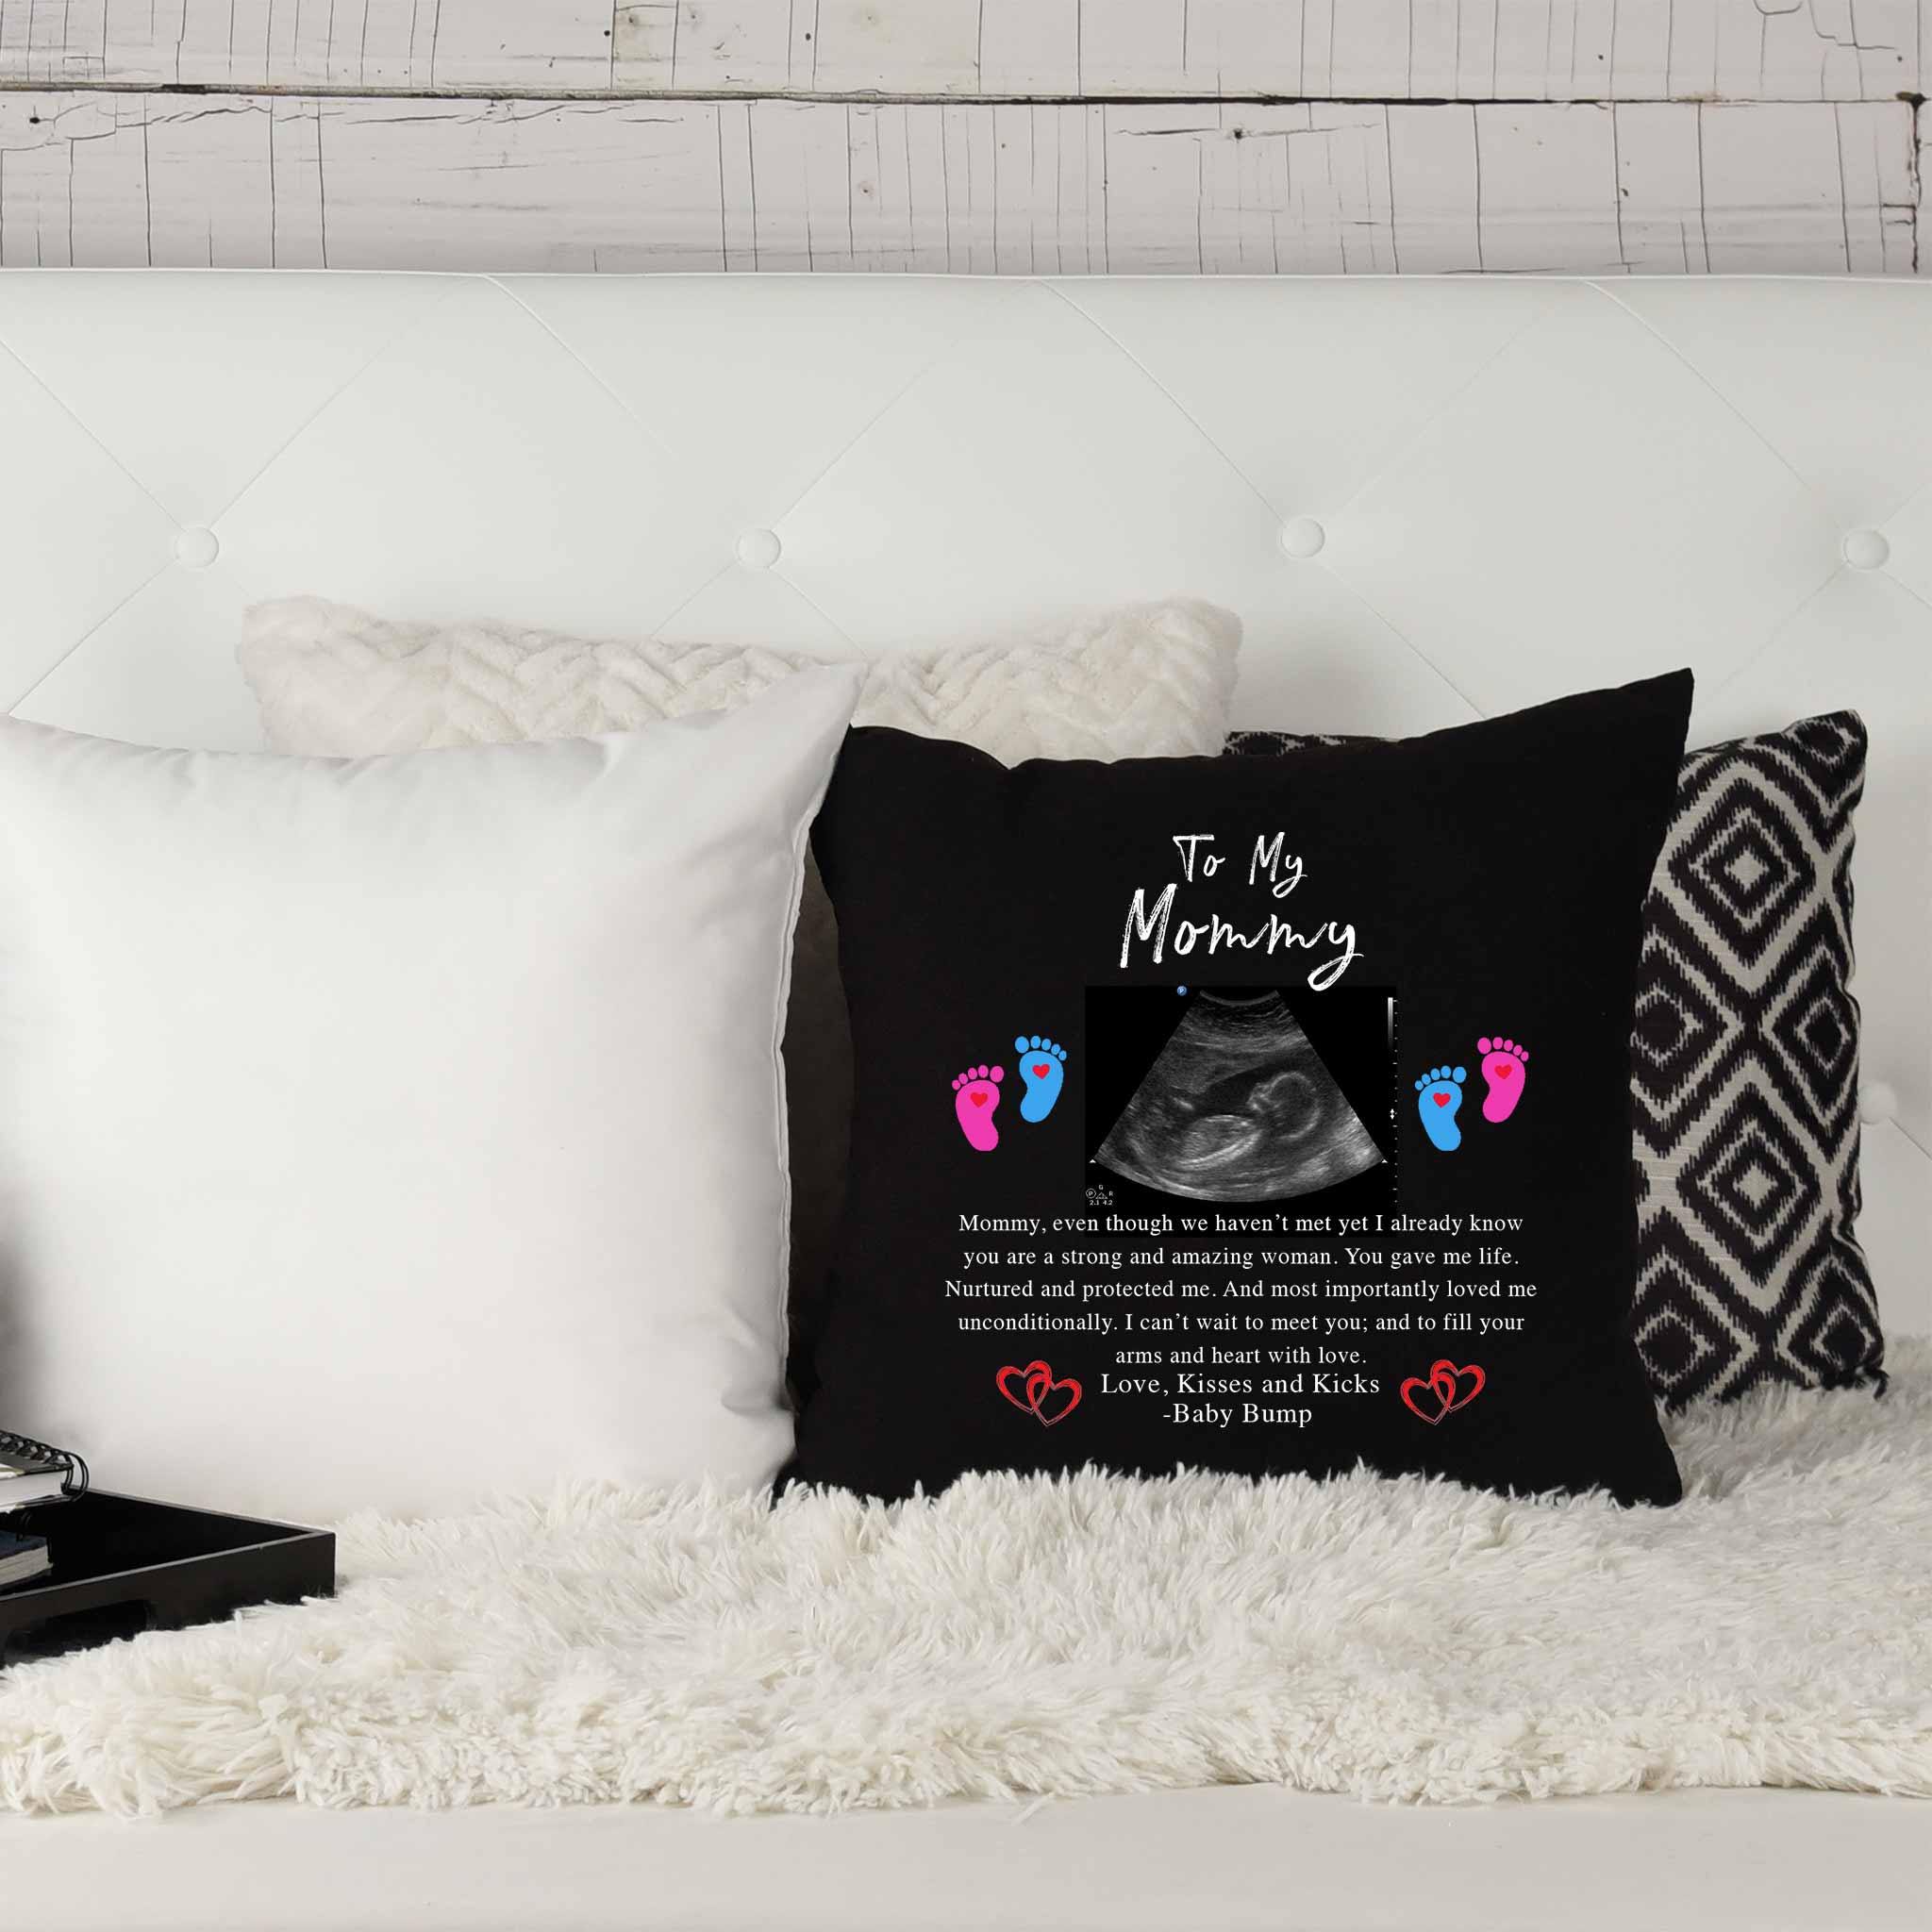 To My Mommy v1 Pillow With Personalized Sonogram Image And From TextCustomly Gifts